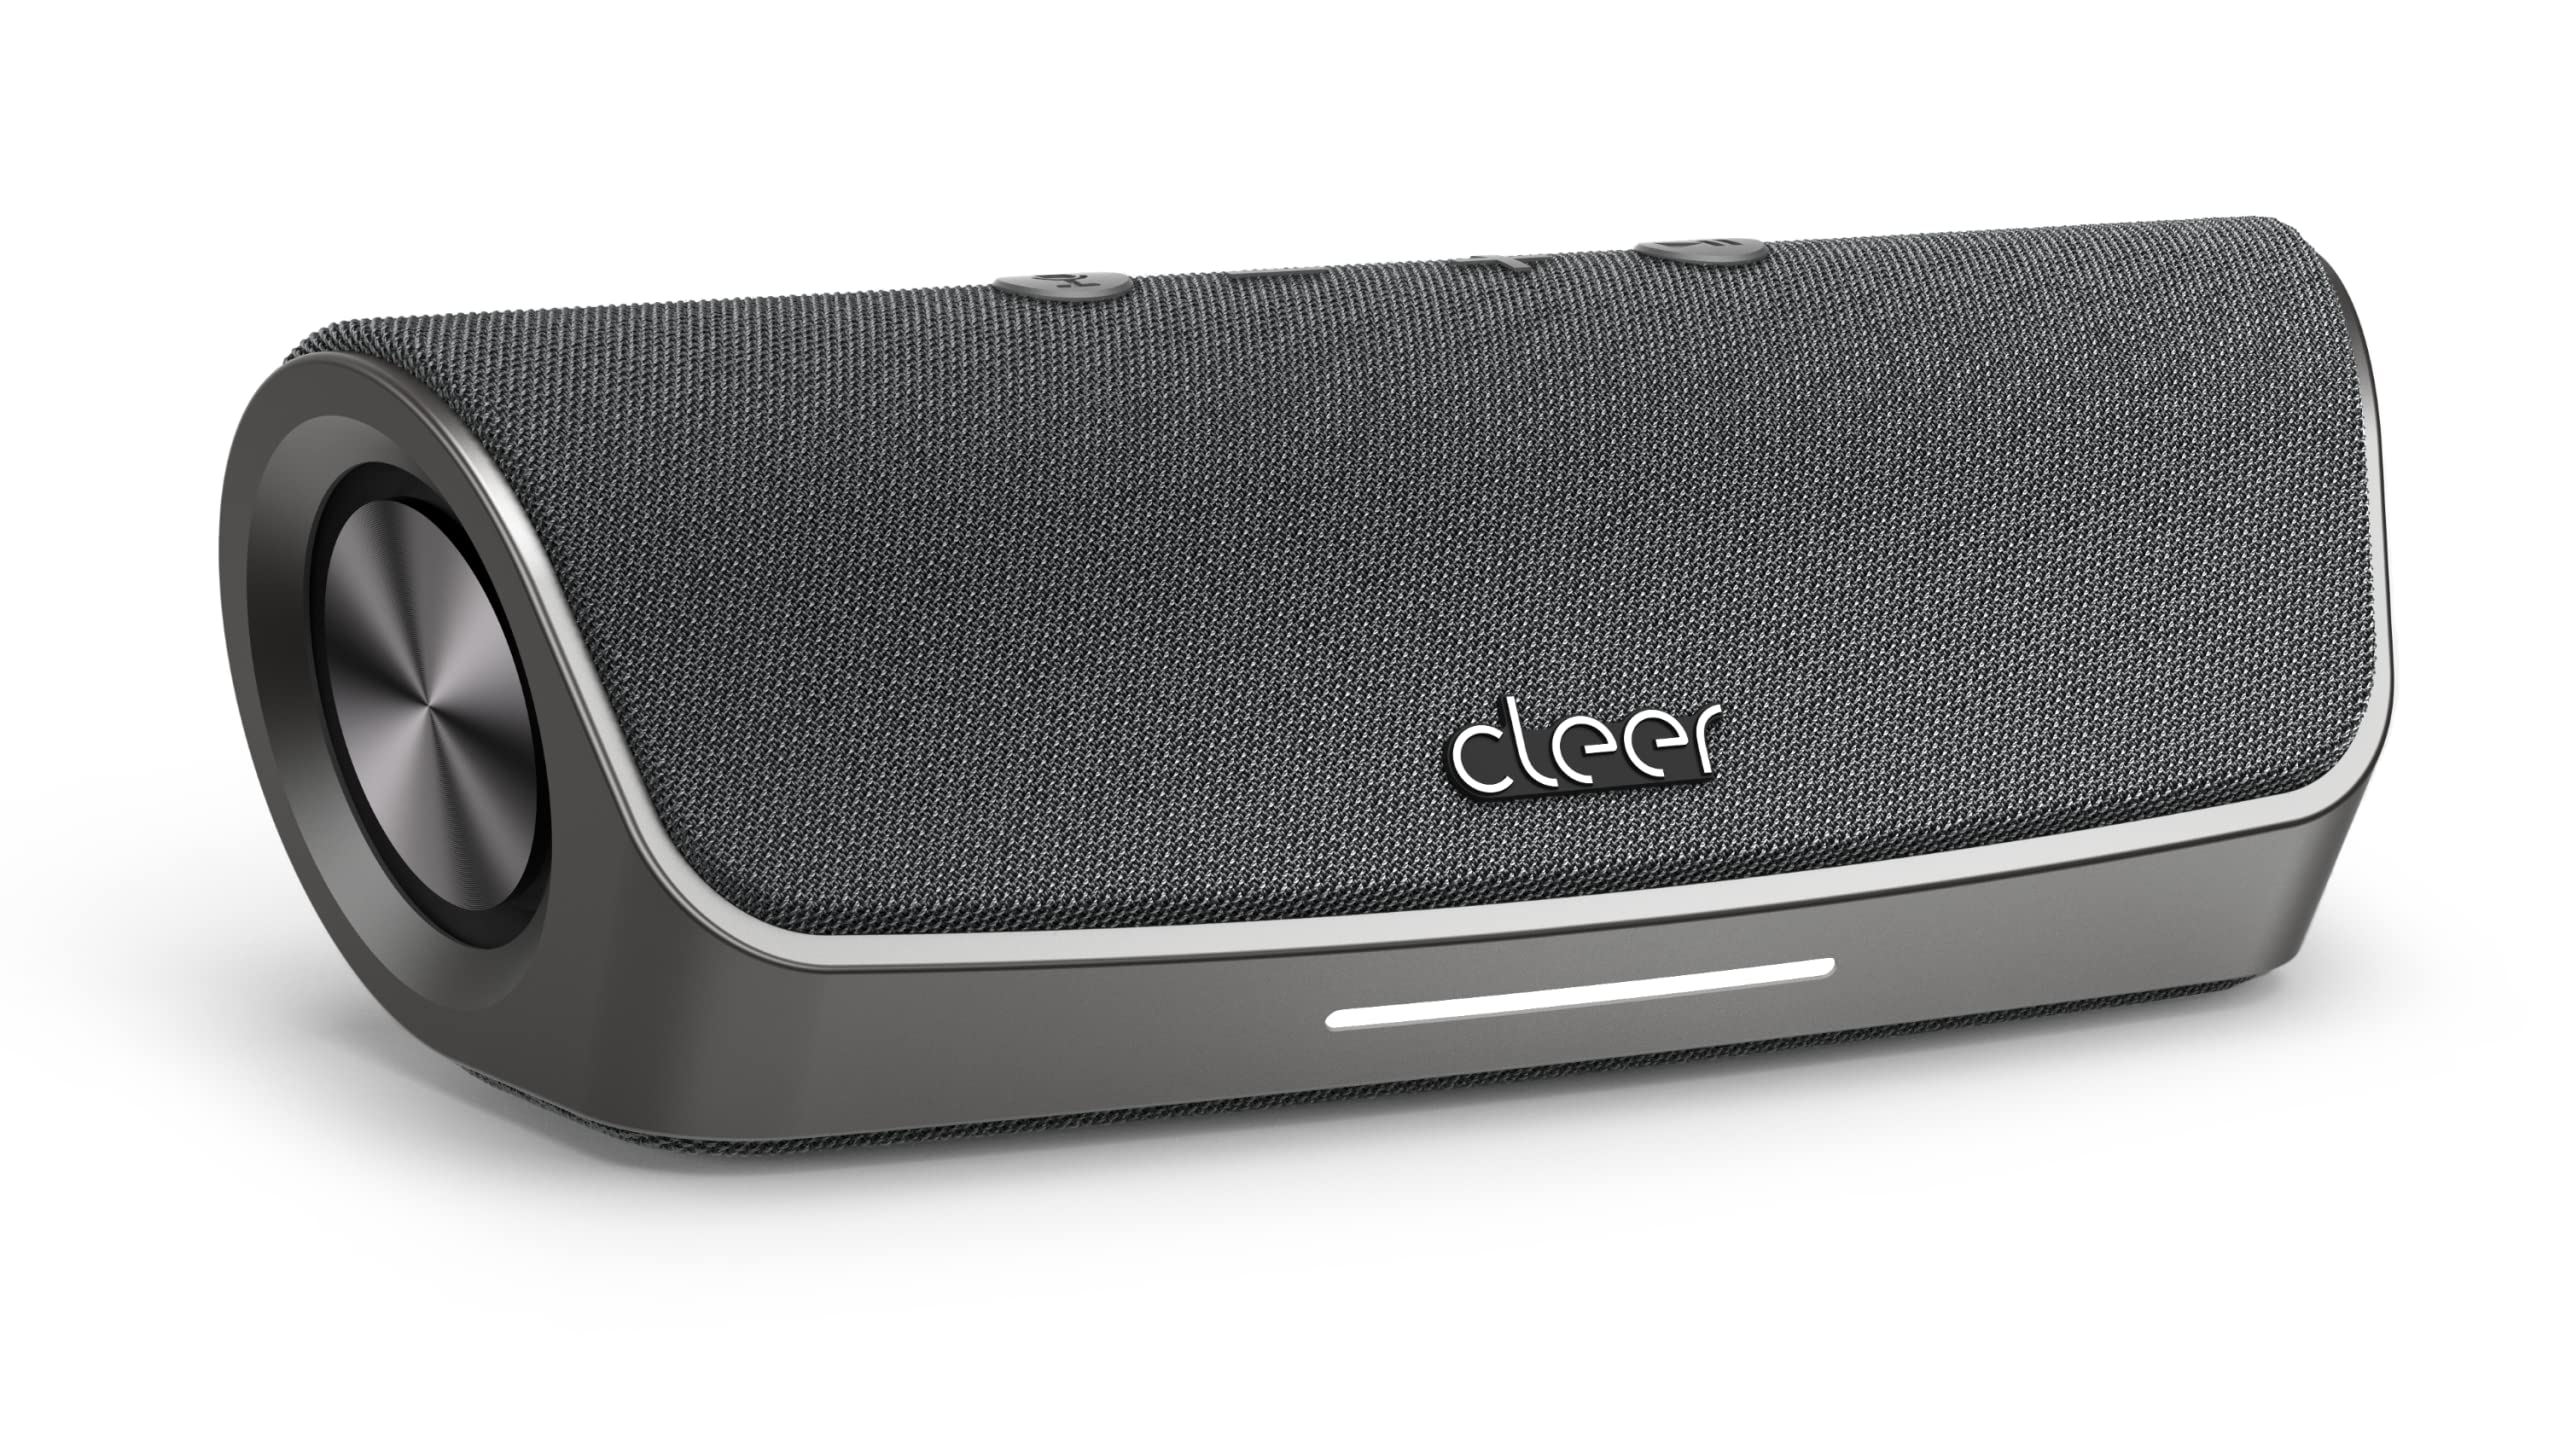 Cleer Scene Portable Bluetooth Speaker,IPX7 Waterproof,Powerful Sound and Deep Bass,Built-in Echo and Noise Canceling Microphone,12 Hours Battery,for Office,Home,Outdoors and Travel-Grey